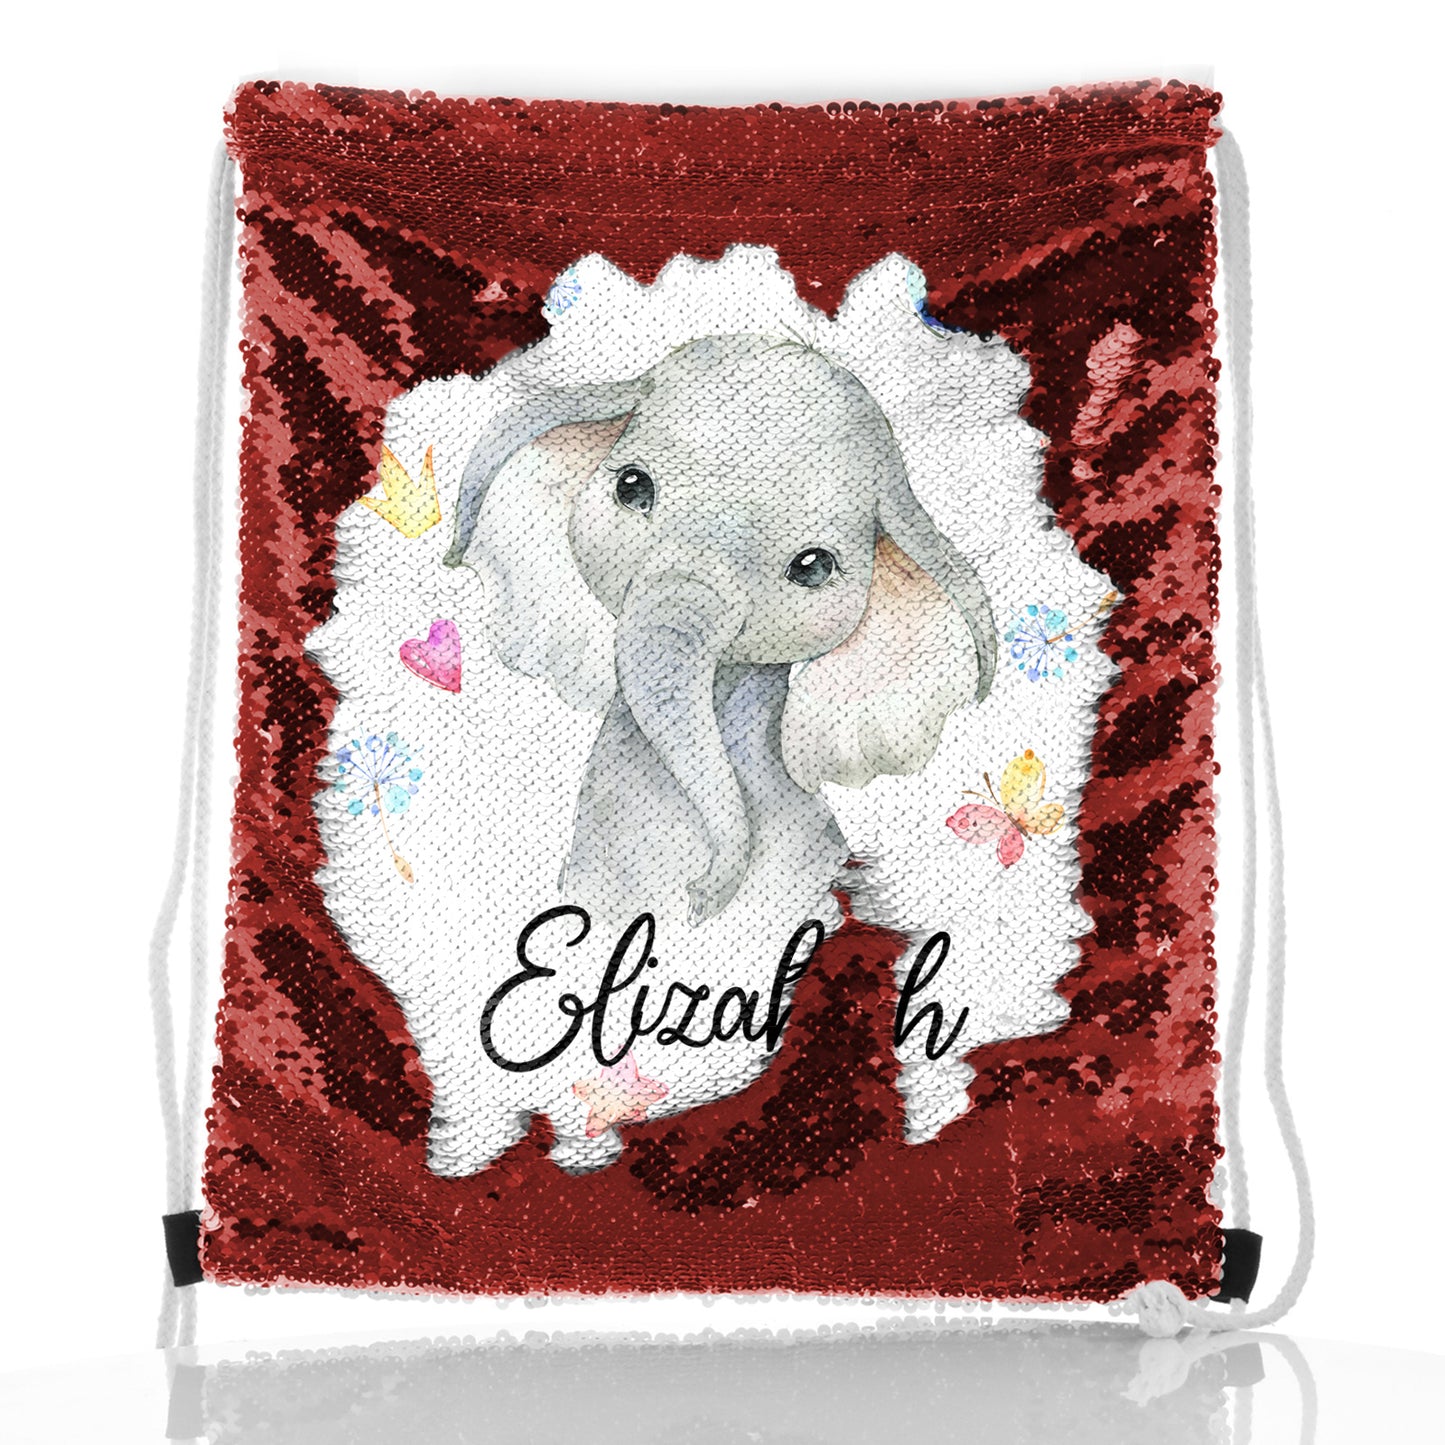 Personalised Sequin Drawstring Backpack with Grey Elephant with Hearts Stars Crowns Butterfly and Cute Text